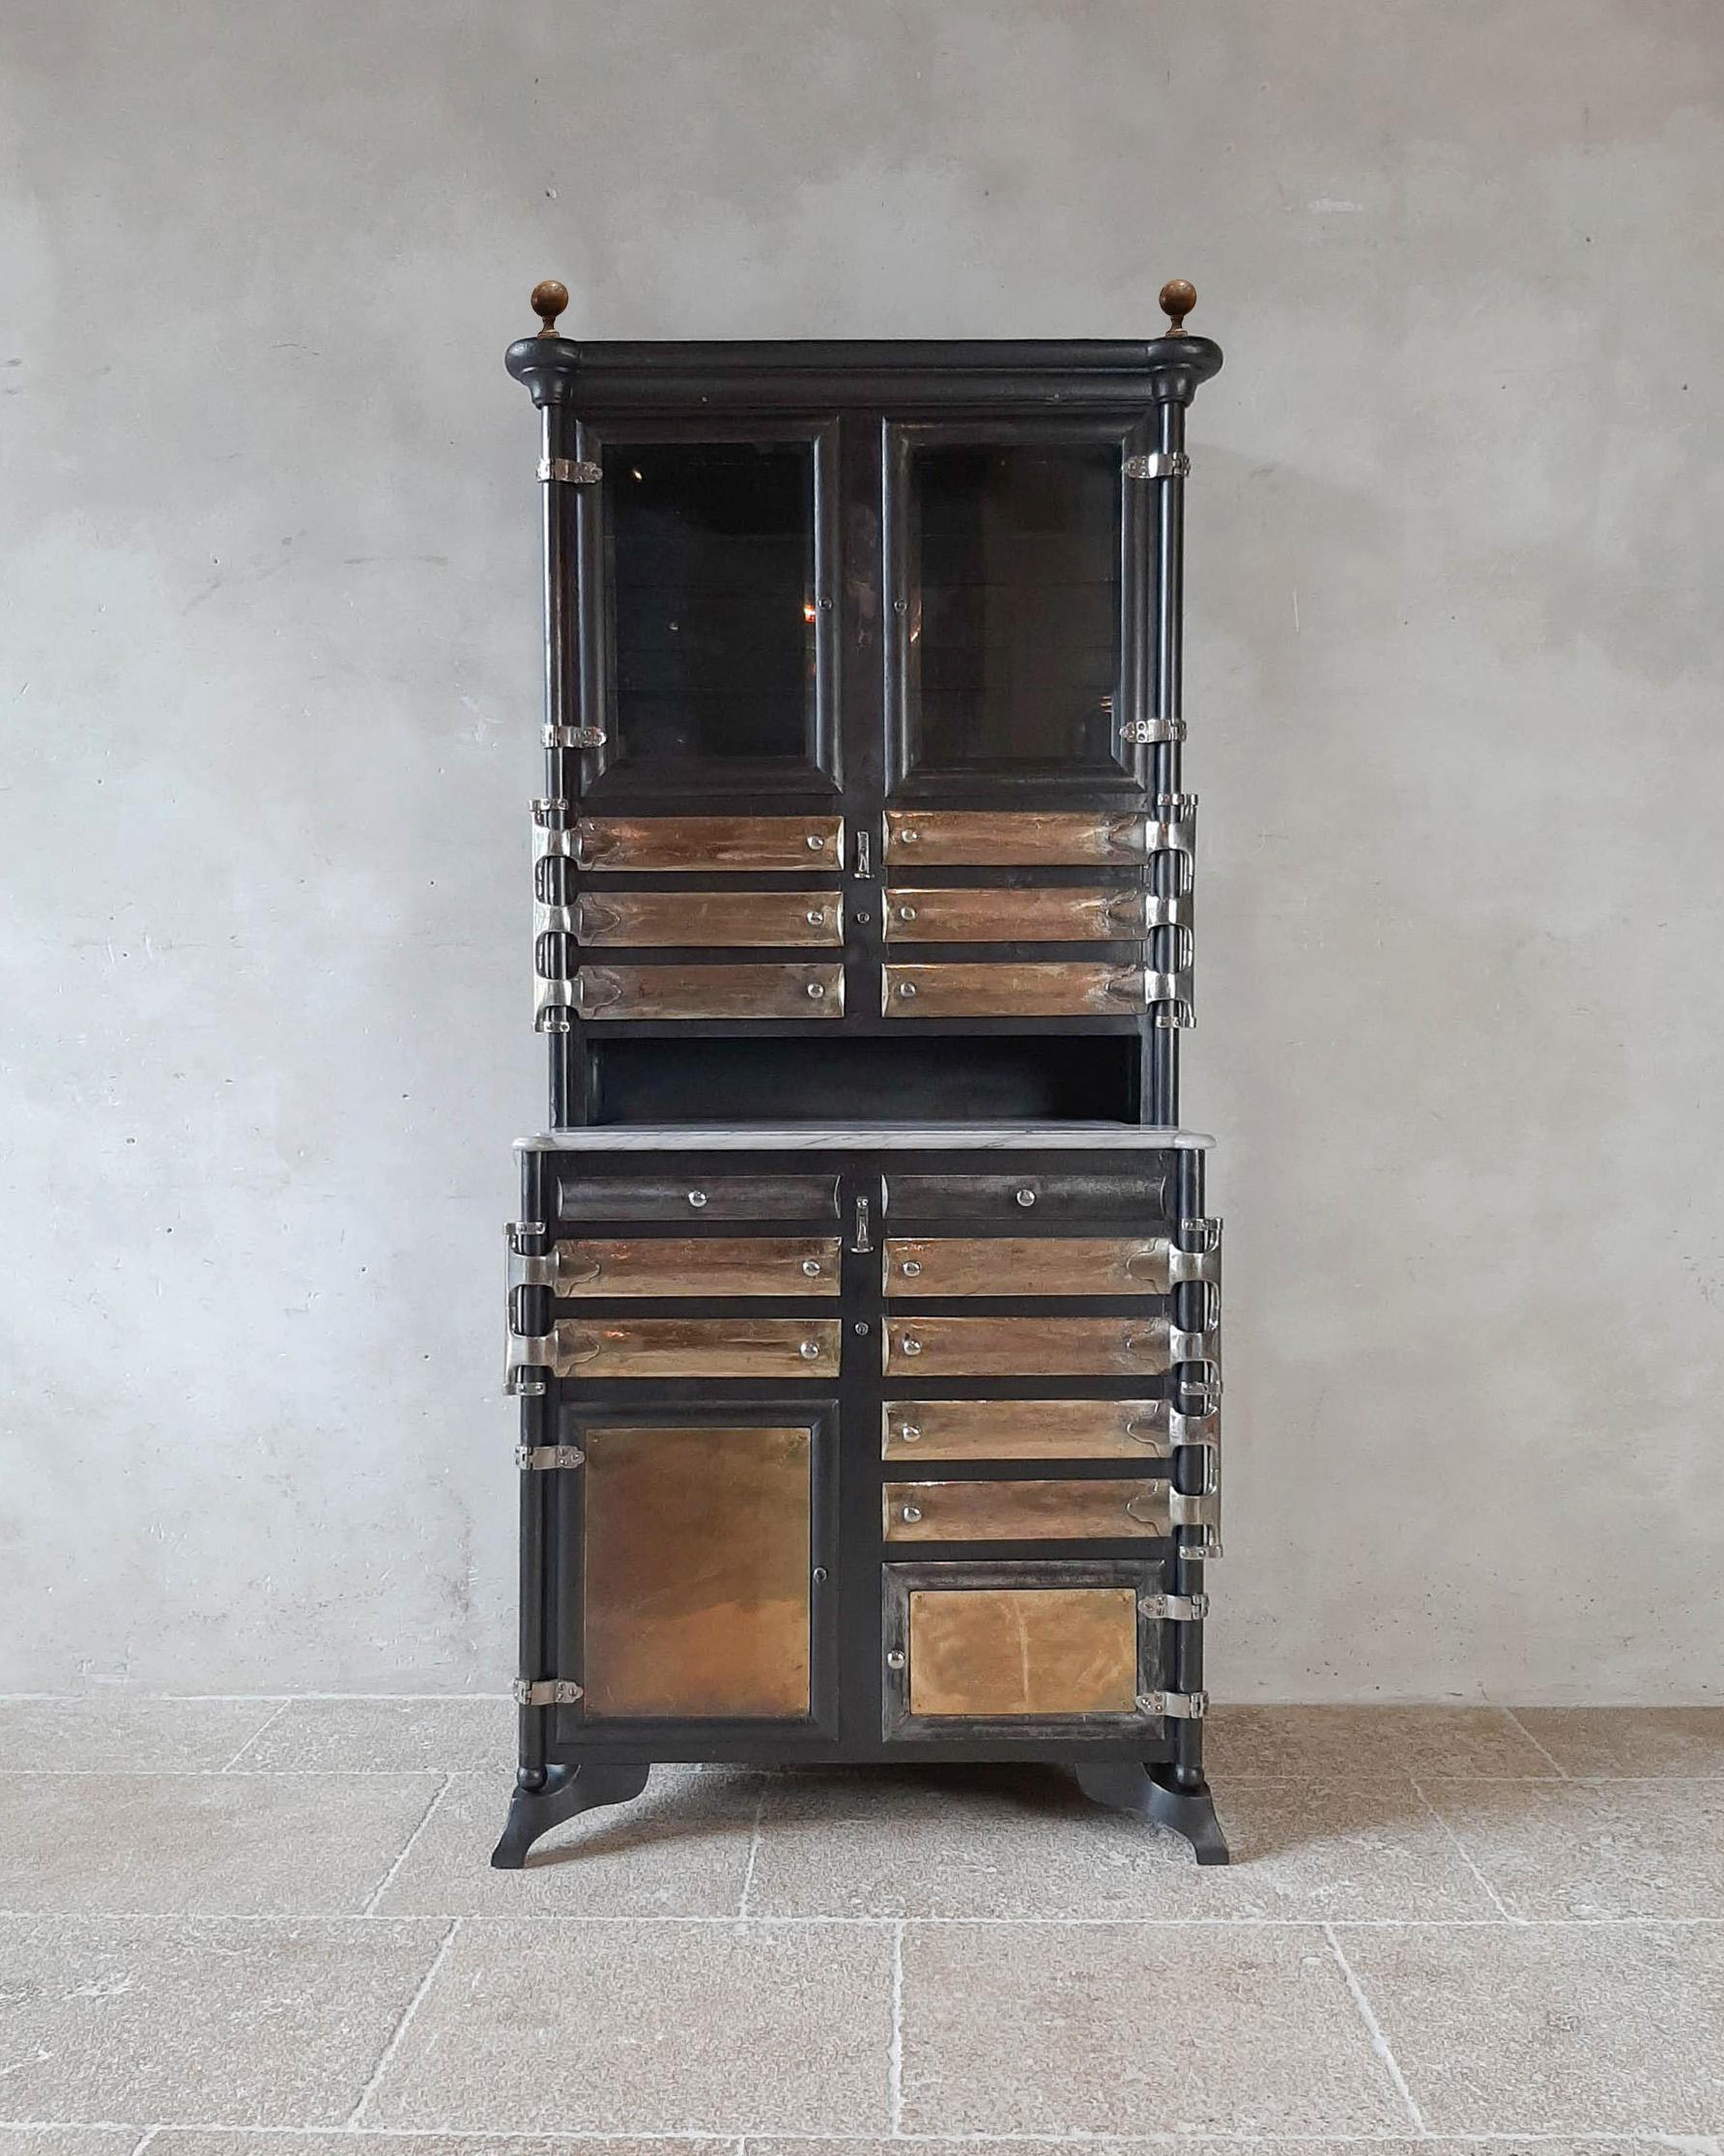 Antique metal dentist or medical cabinet. Heavy quality polished gunblack metal. The cabinet has a marble top, nickel hardware and hinges, and doors laid in with bevelled glass.

Vintage iron furniture, robust and elegant at the same